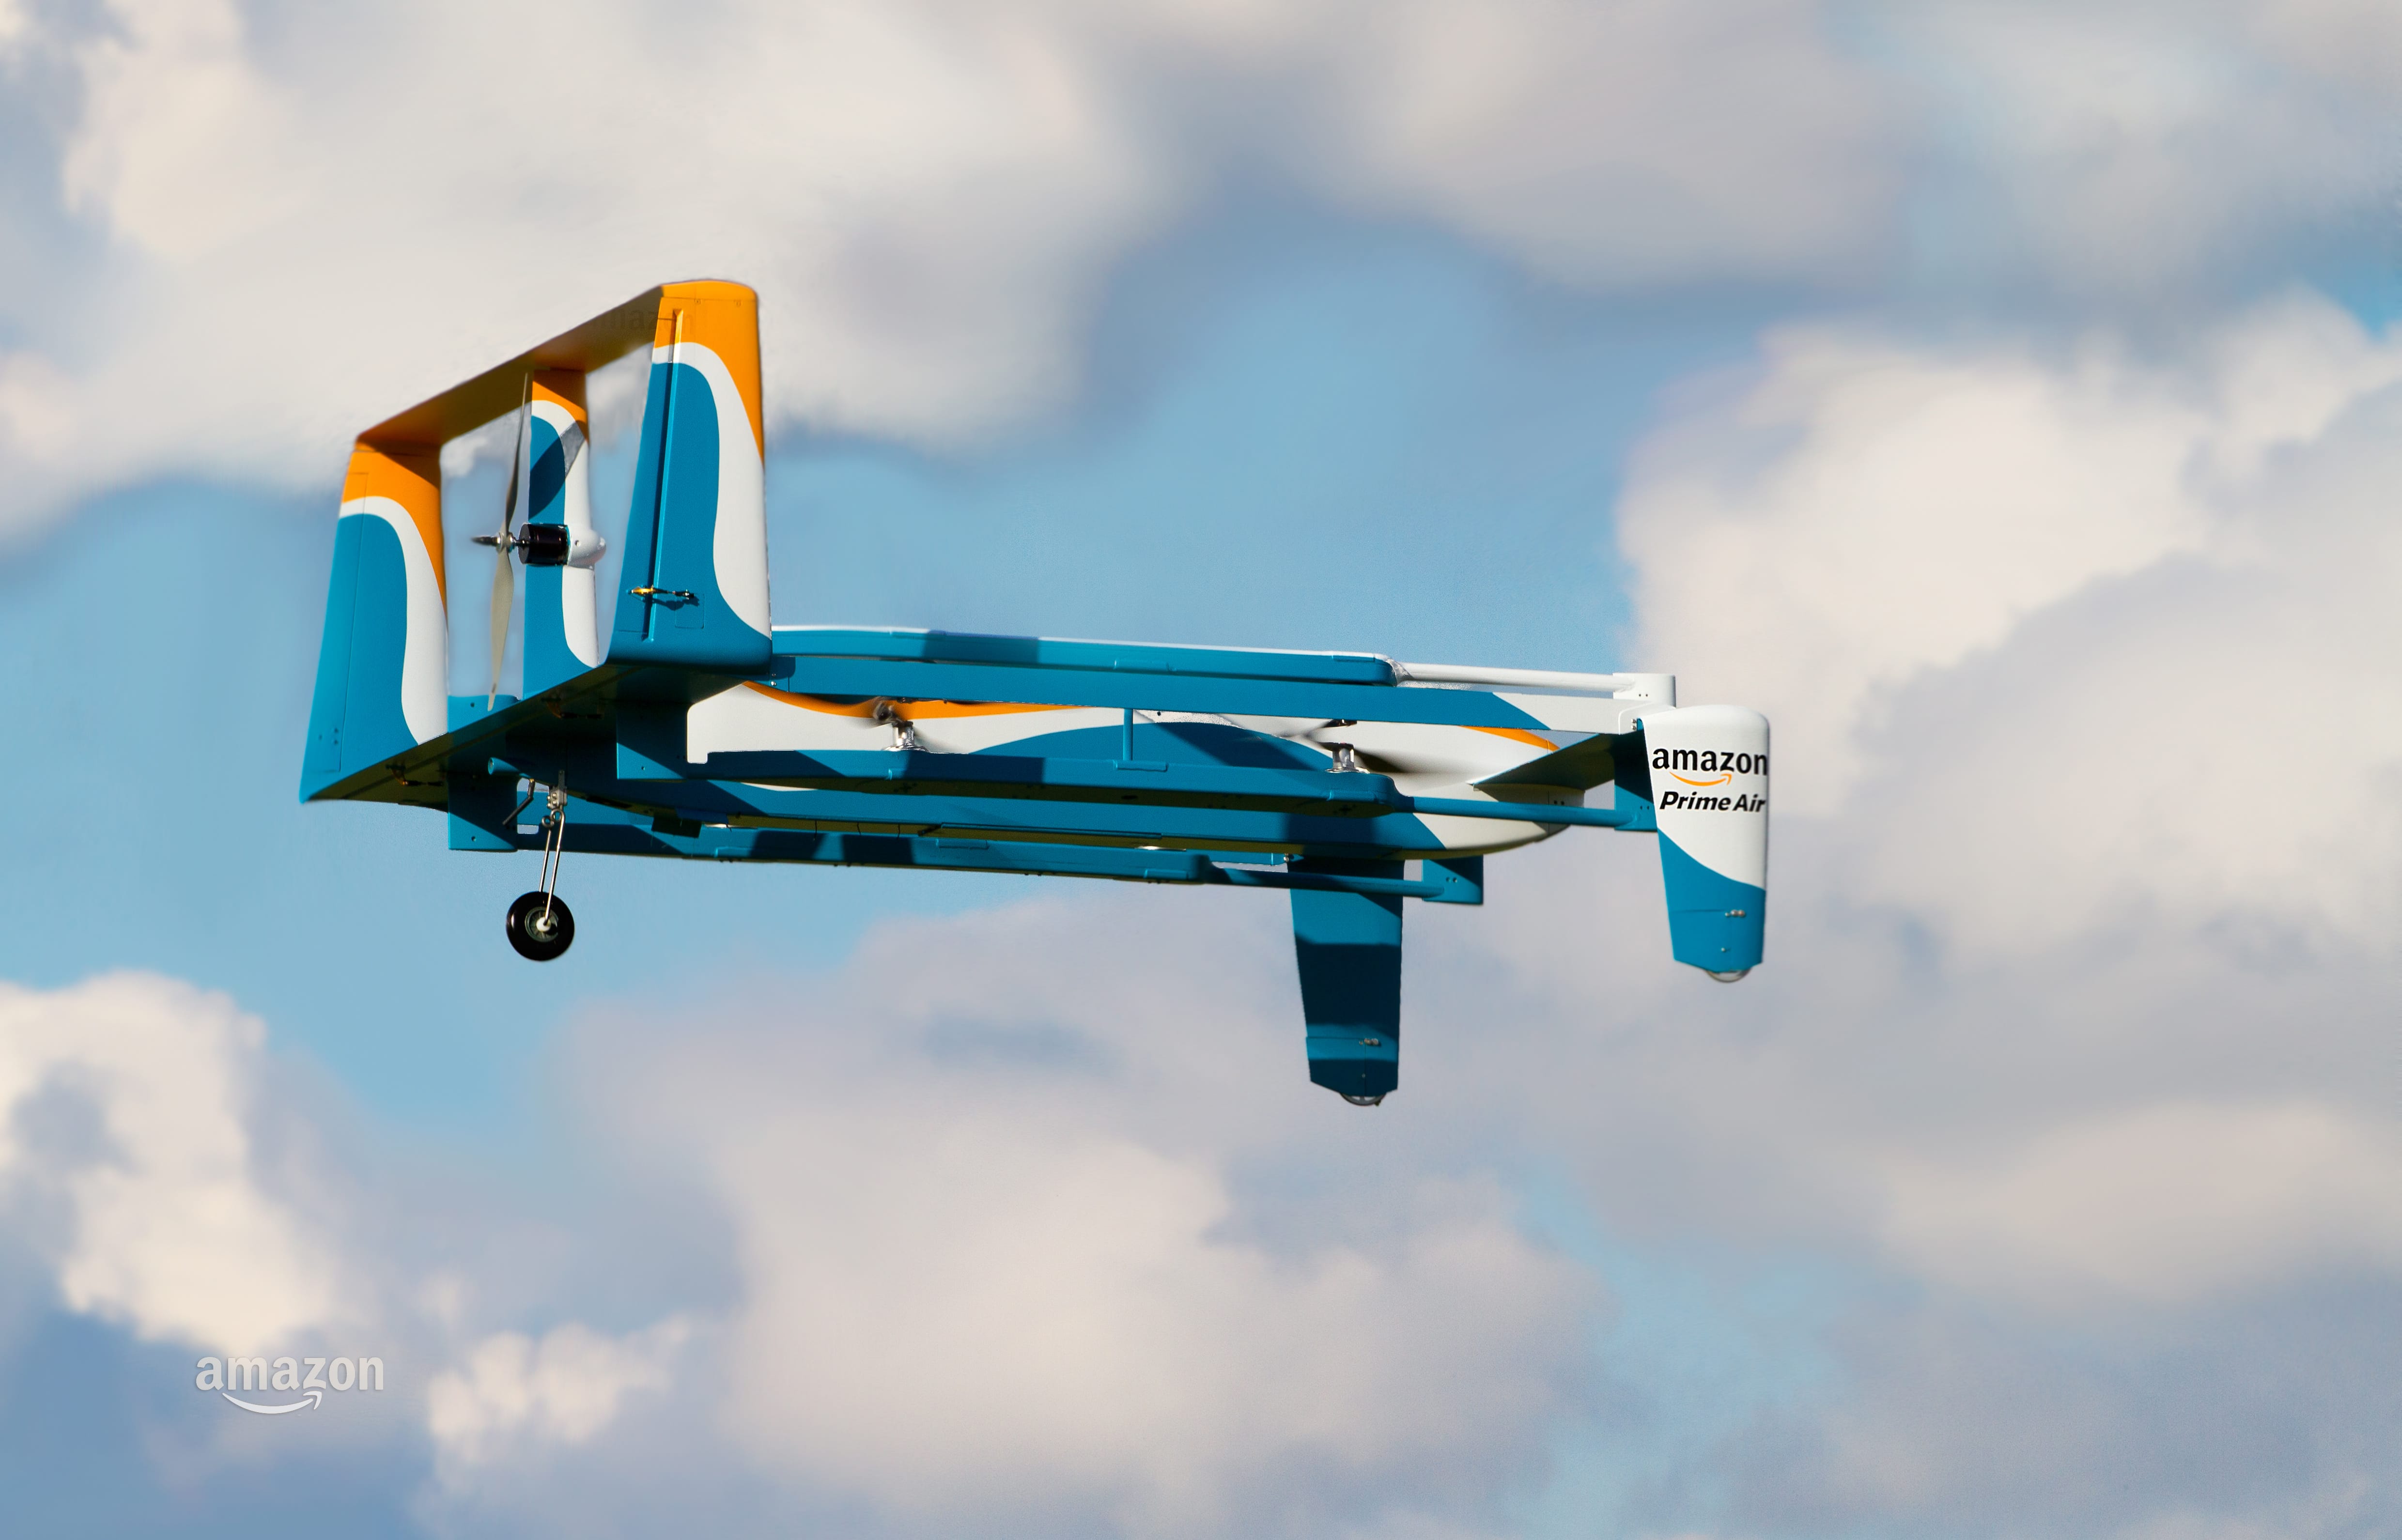 &#039;Amazon Prime Air&#039; is a future service that Amazon says will deliver packages up to five pounds in 30 minutes or less using small drones.